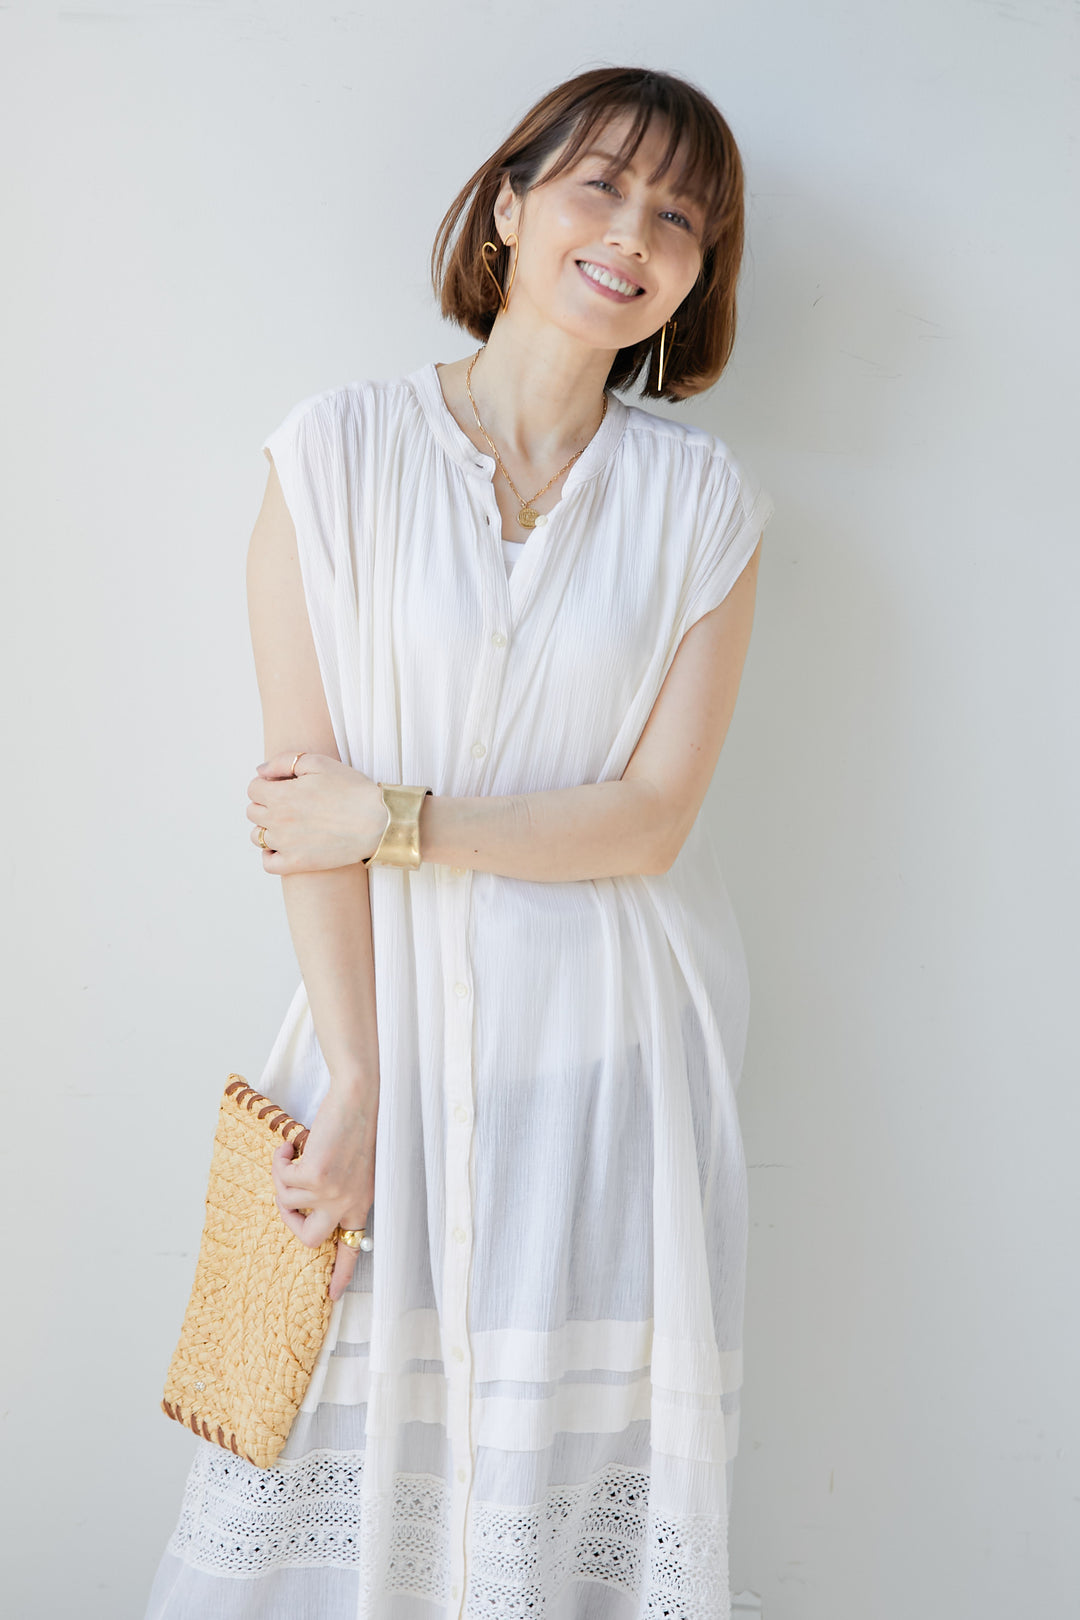 Cotton crepe x lace French sleeve dress